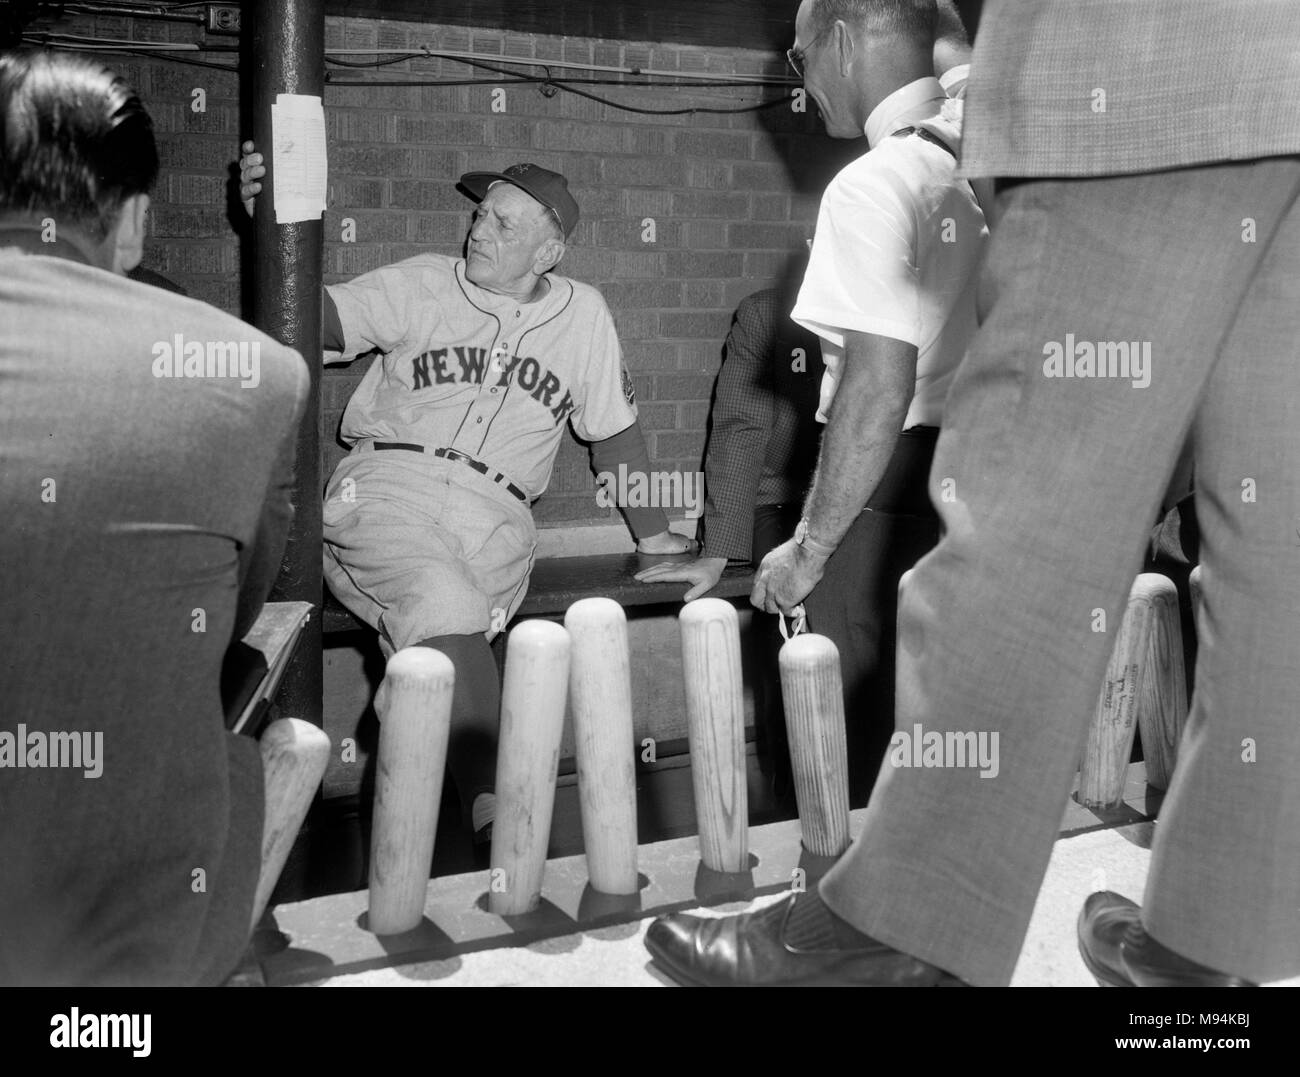 New York Mets manager Casey Stengel talks to reporters from his dugout perch at Wrigley Field in Chicago in 1963. Stock Photo